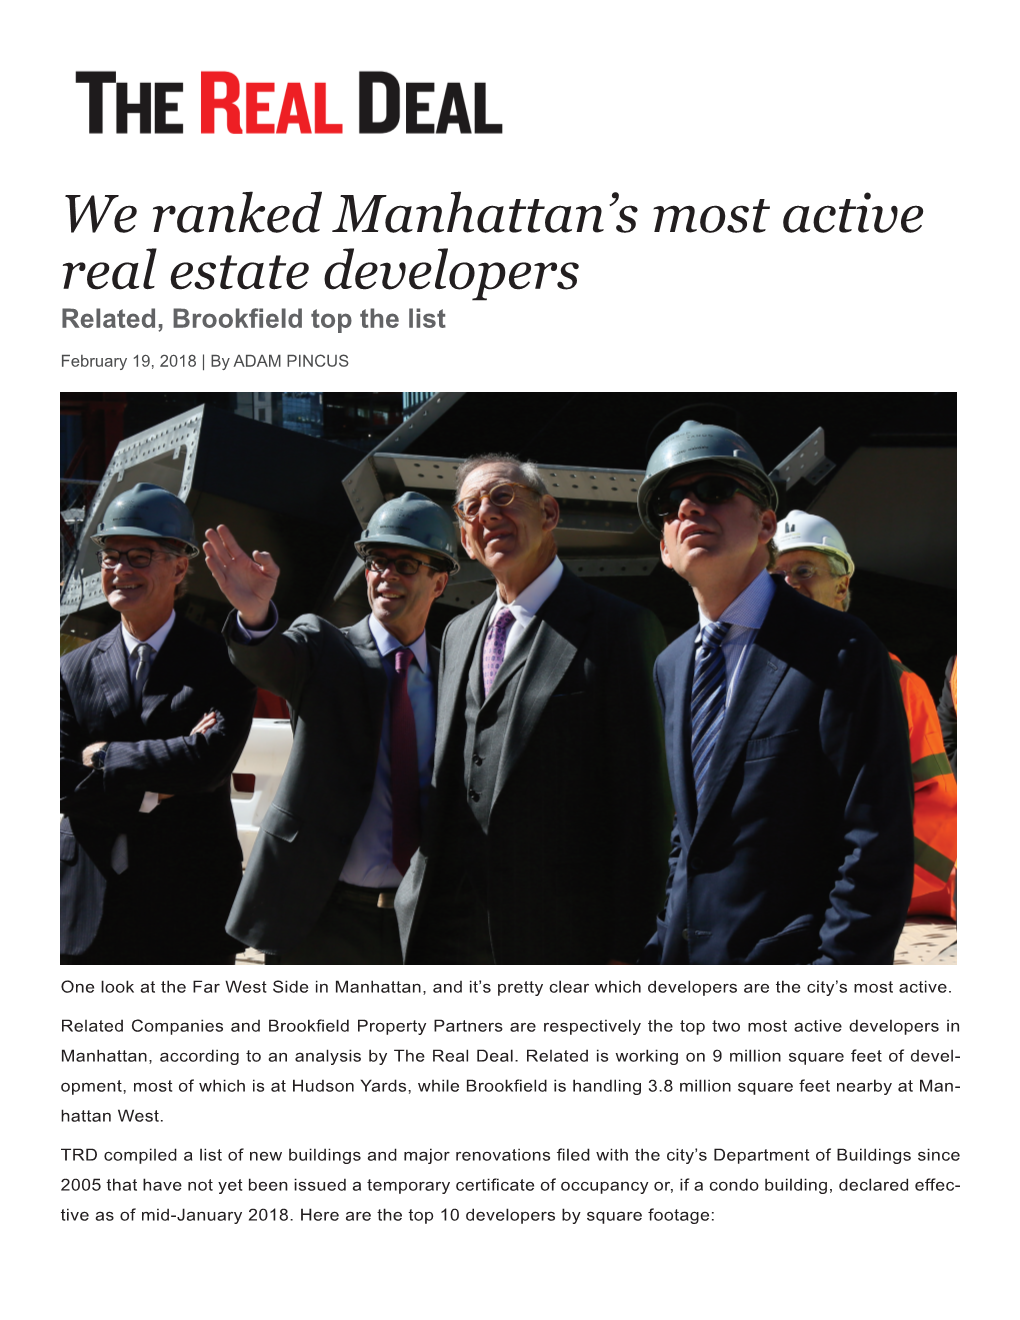 We Ranked Manhattan's Most Active Real Estate Developers